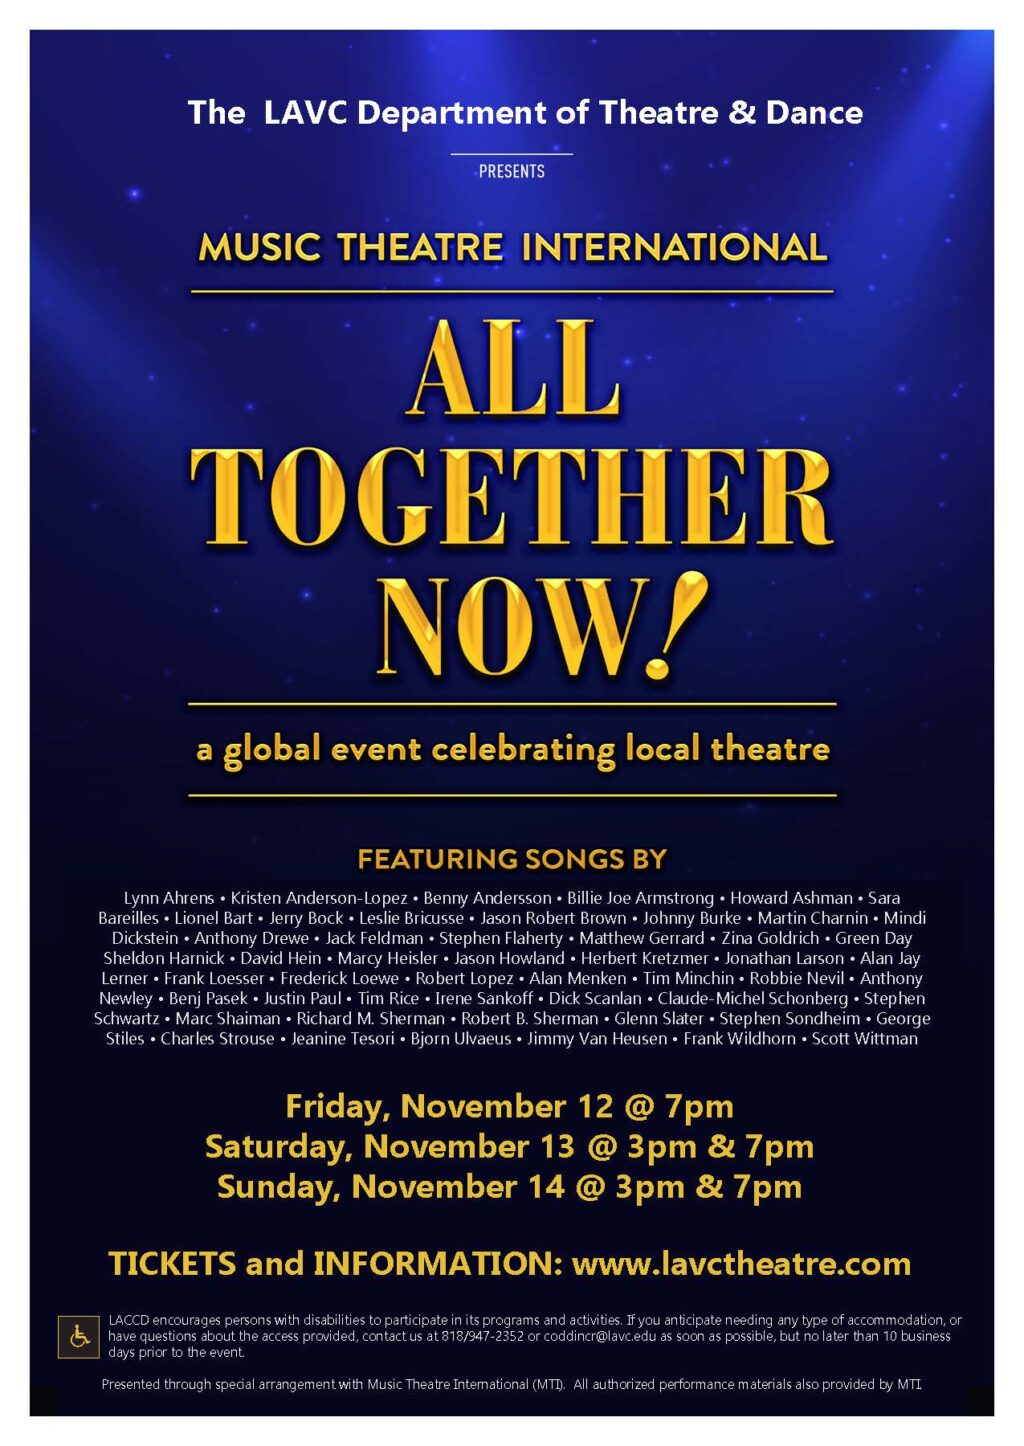 "All Together Now!”  - A Broadway Musical Revue presented by Music Theatre International (MTI) and the LAVC Department of Theater and Dance 